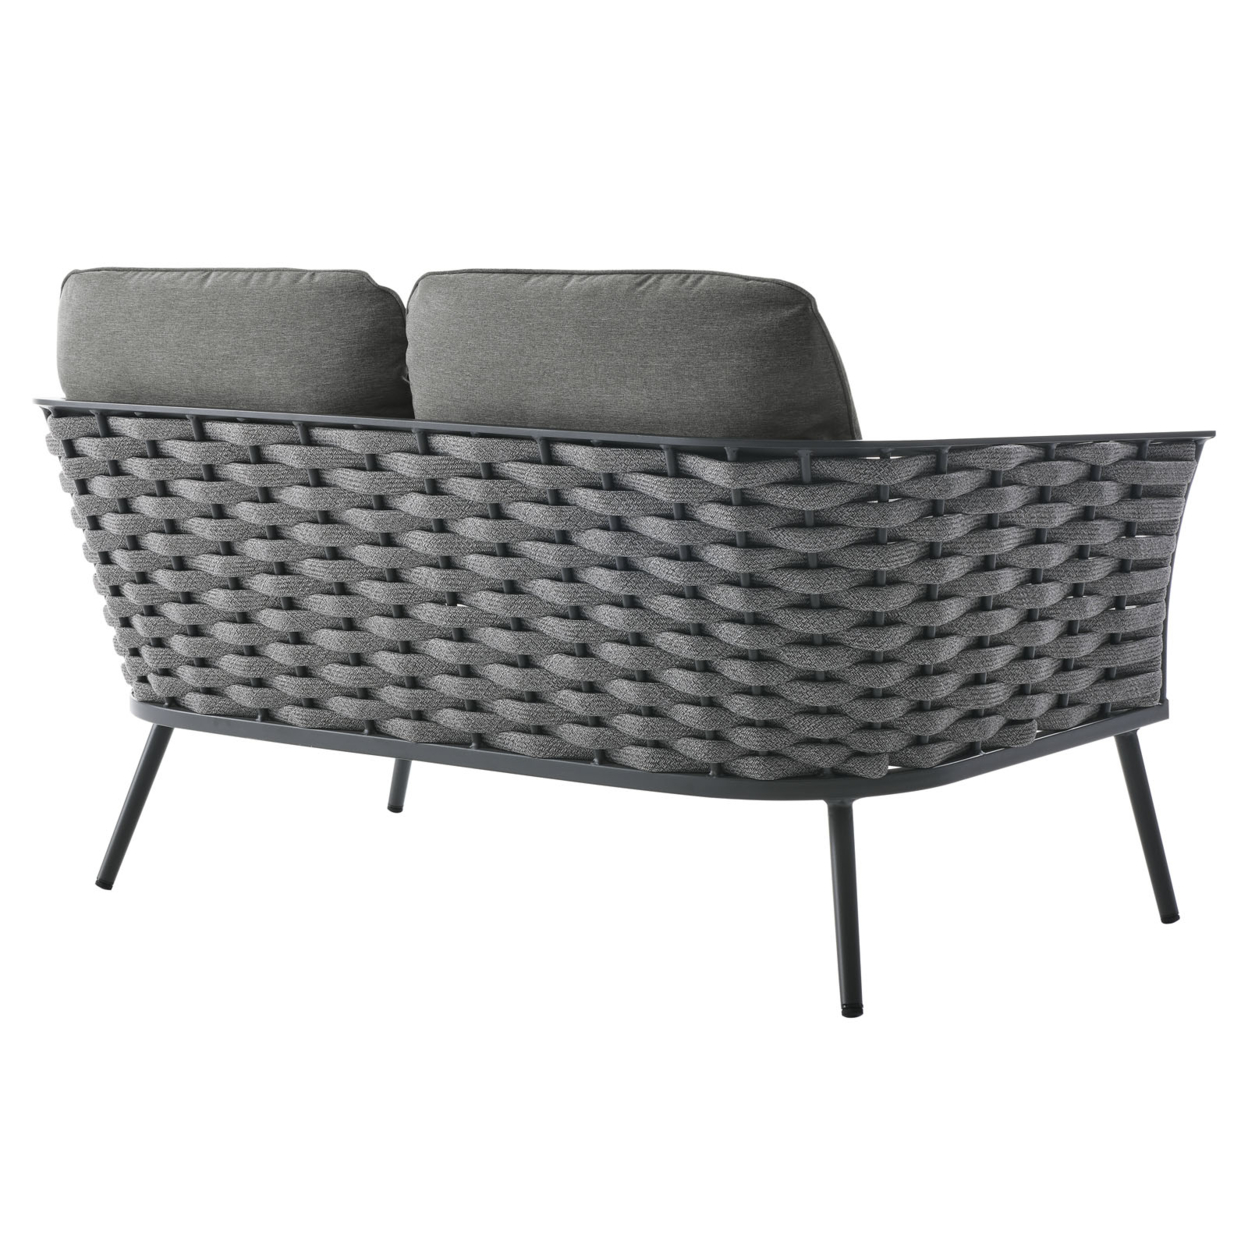 Stance Outdoor Patio Aluminum Loveseat, Gray Charcol